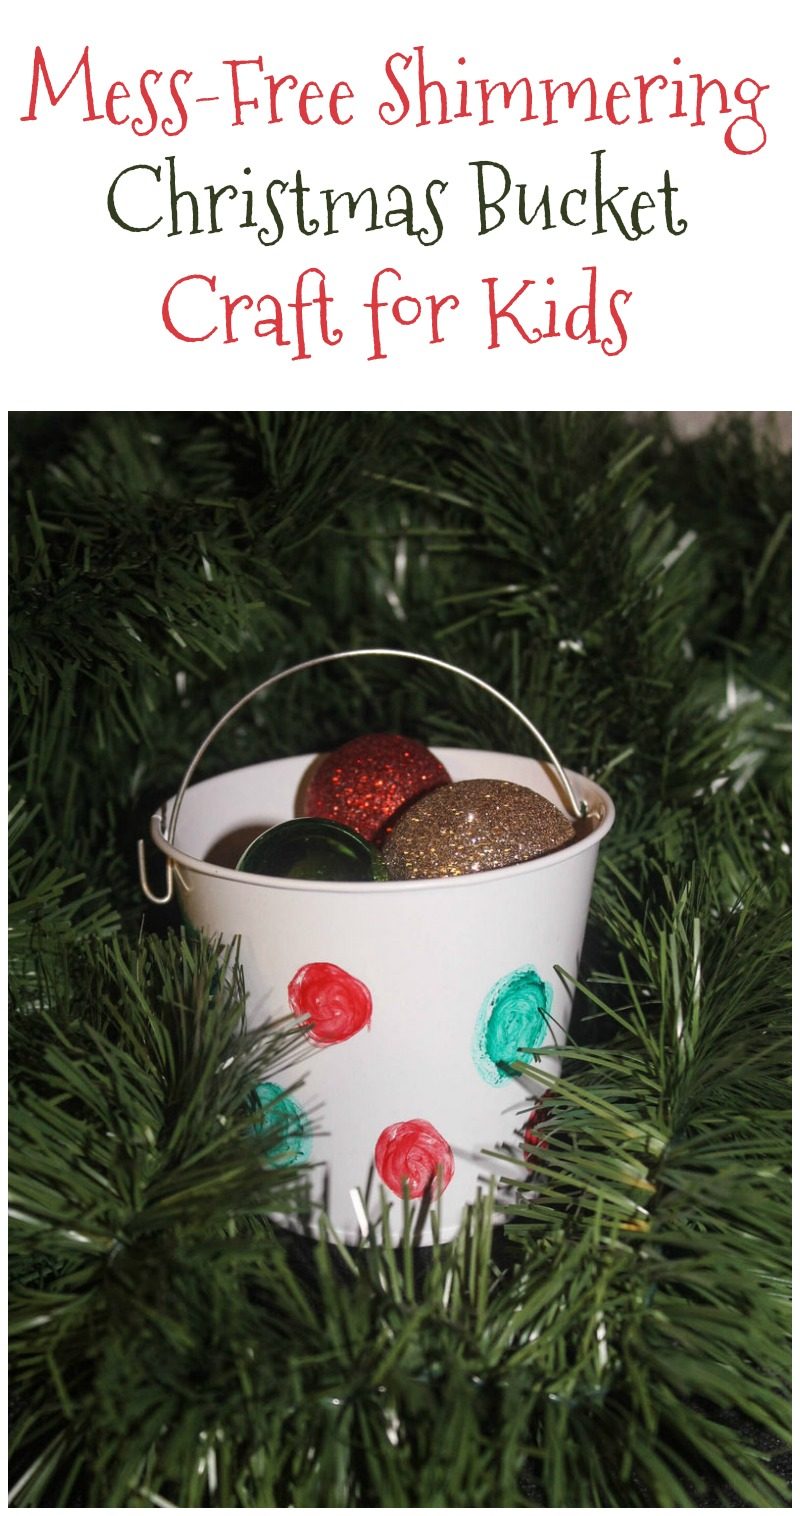 Check out this super simple Christmas craft your kids can make with Kwik Stix and other inexpensive supplies (I made it, so trust me, your kids can totally rock it).